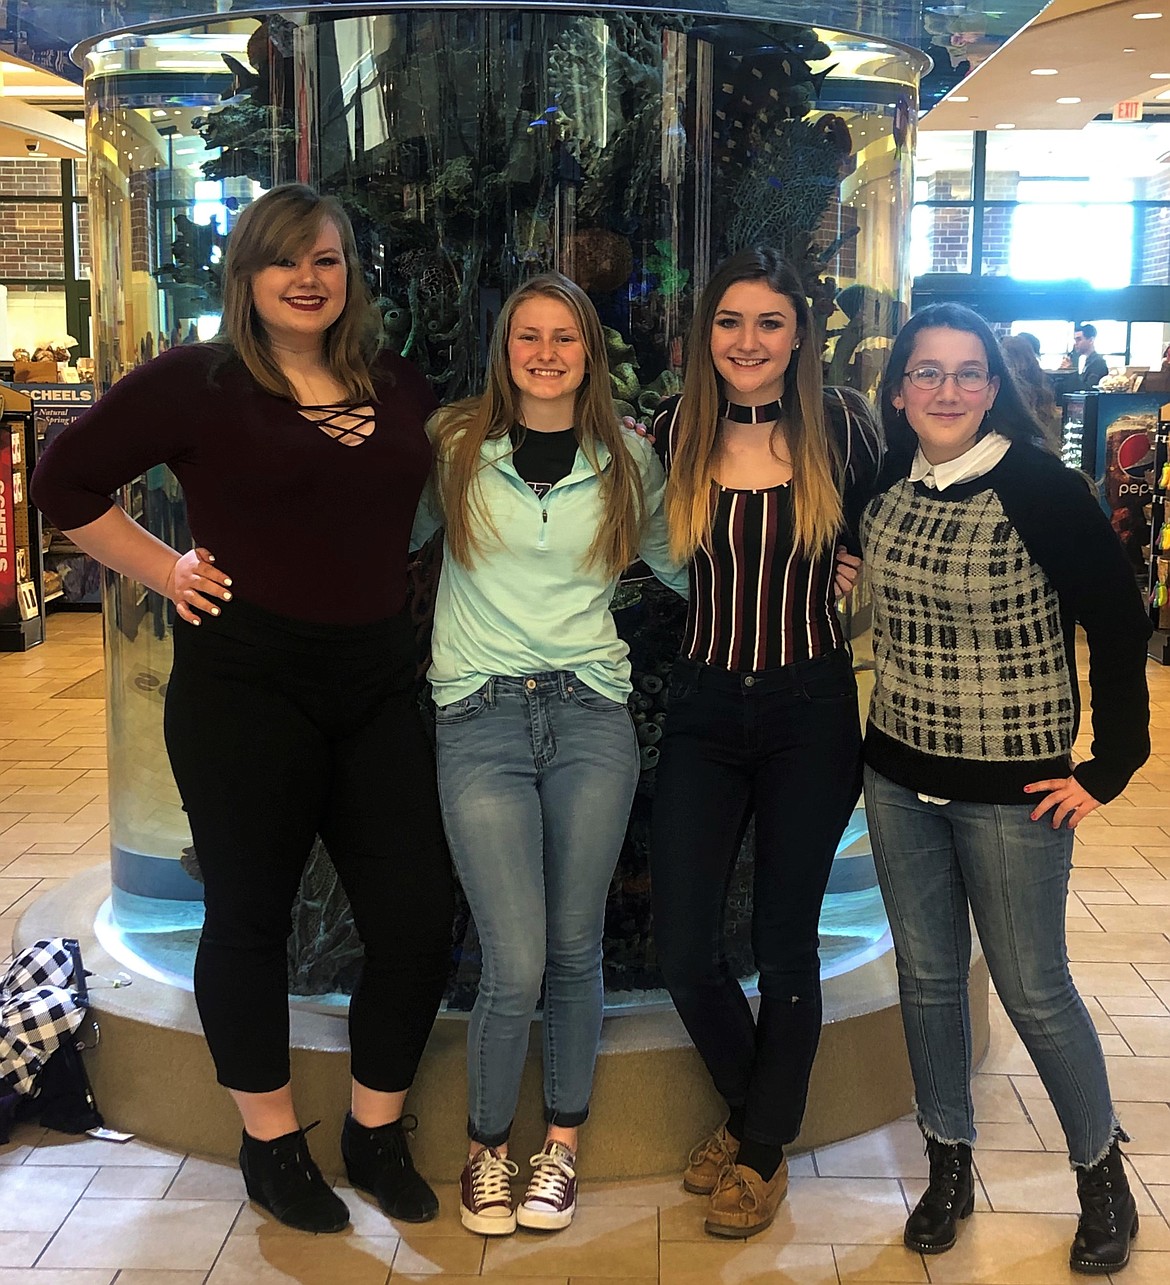 THE ALBERTON BPA team of Eryn Odell, Emmah Baughman, Kristina Solinger and Lyssa Kromrey went to state but did not win a seat at the National Conference in Anaheim next in May. (Photo courtesy of Alberton BPA)